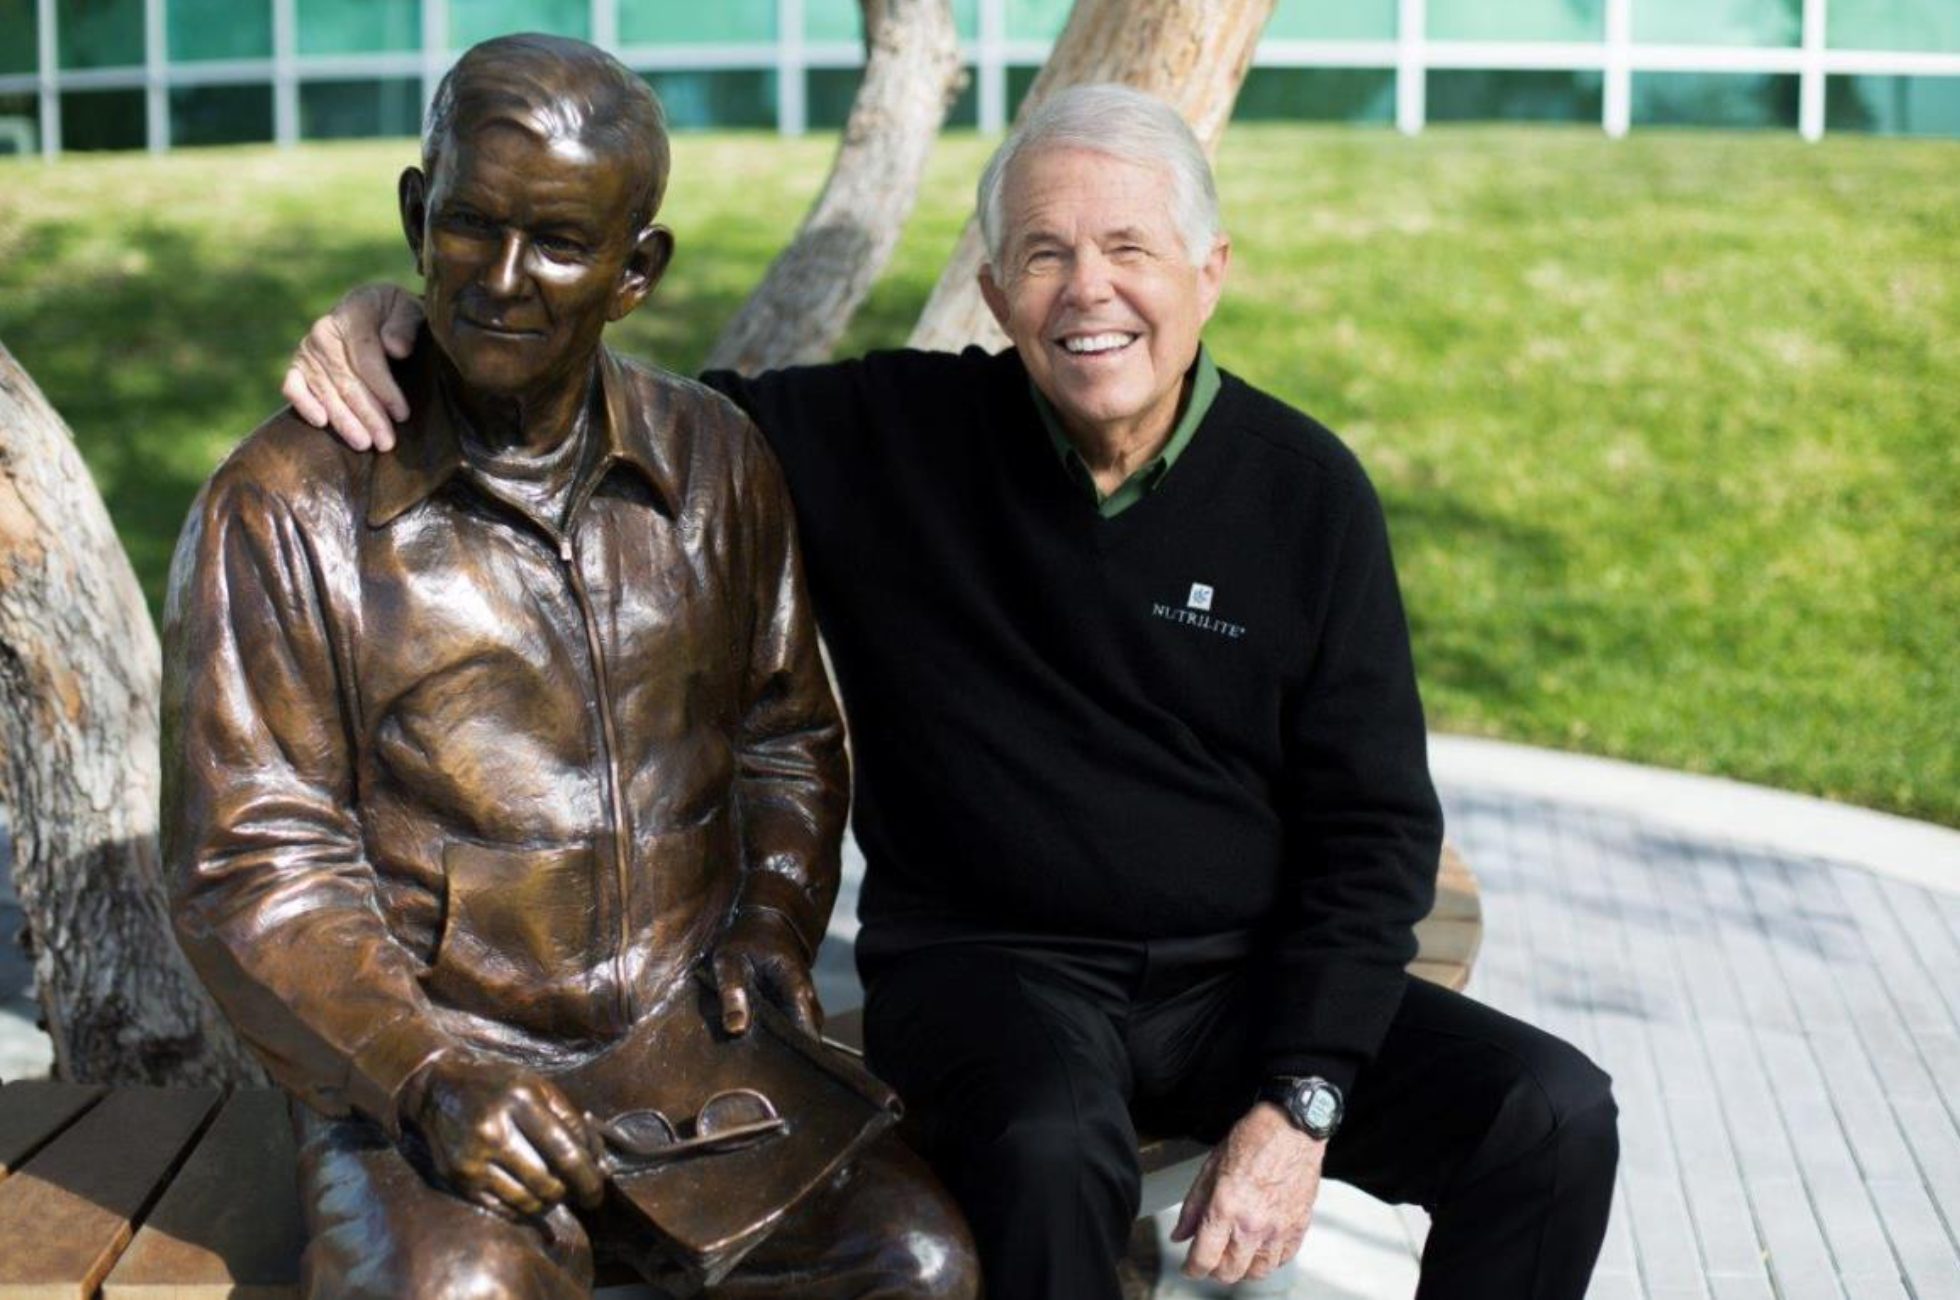 Sitting next to a life-size statue of my father Carl F. Rehnborg. It’s easy to see why it’s a favorite photo stop for visitors at the Nutrilite Health Institute. The statue was inspired by his famous “Pepper Tree Talks” and his many conversations filled with visionary ideas. Buena Park, California. March 2017.